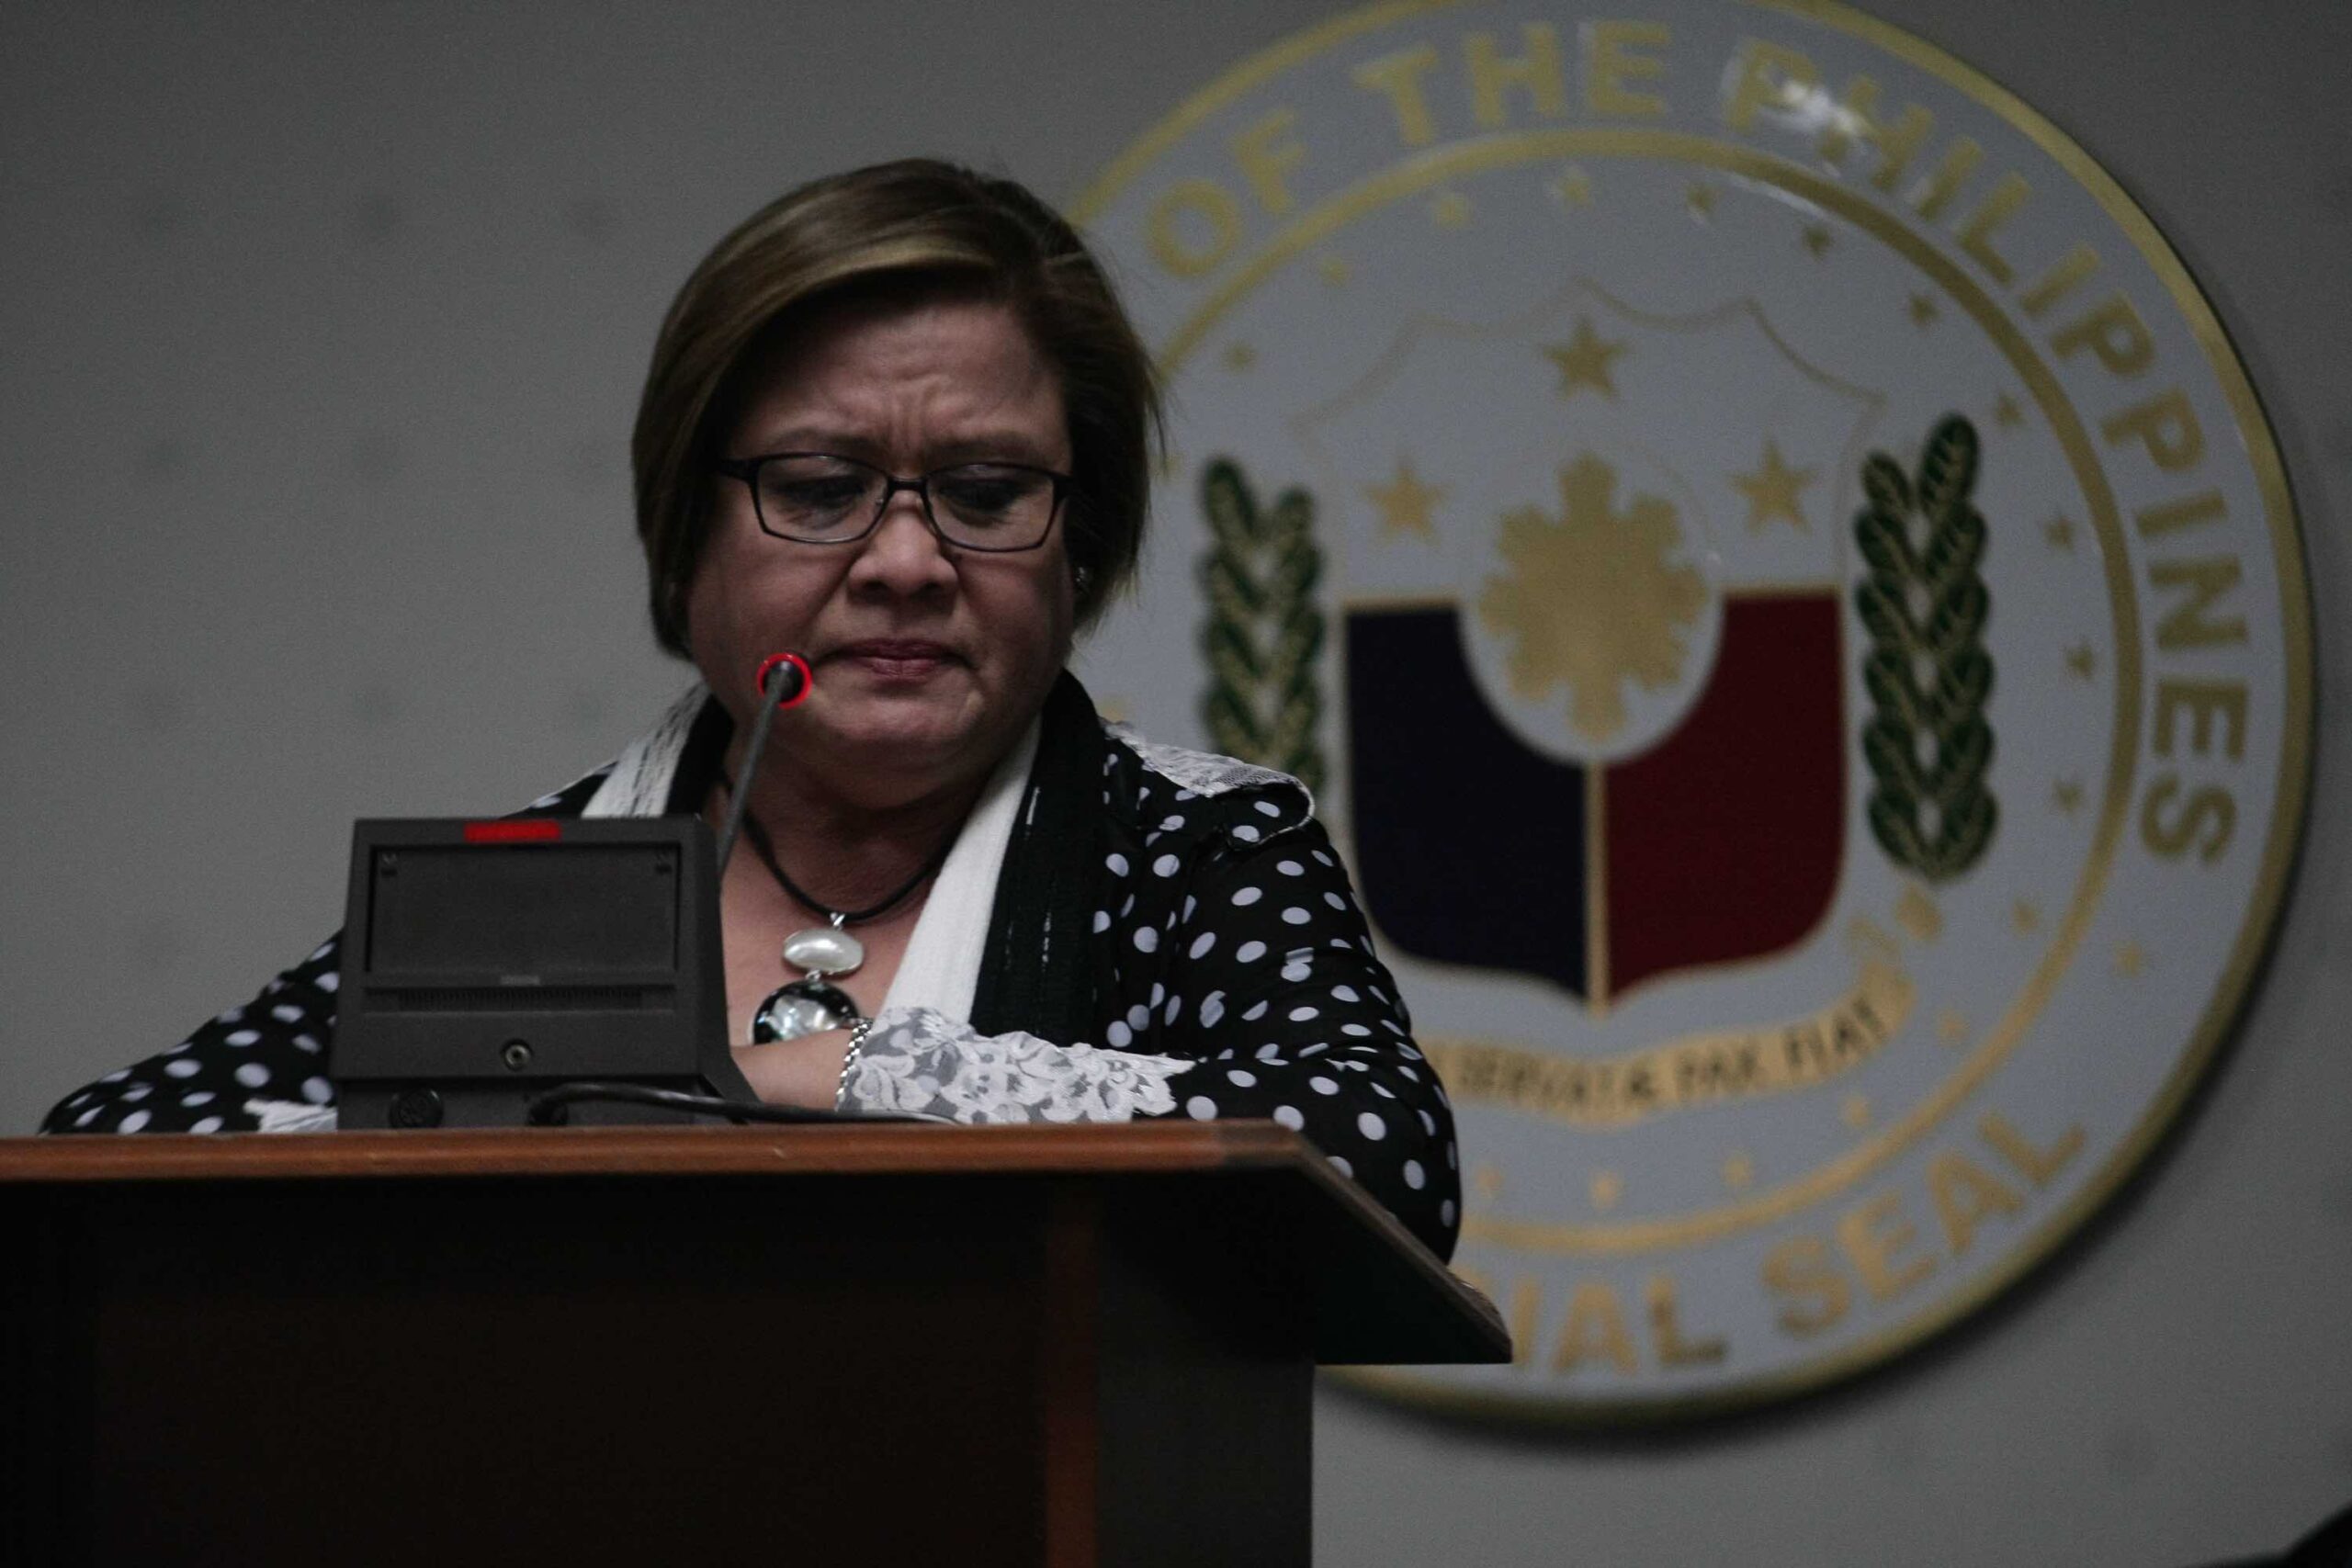 Emotional De Lima vows to fight charges, seeks prayers for safety in jail